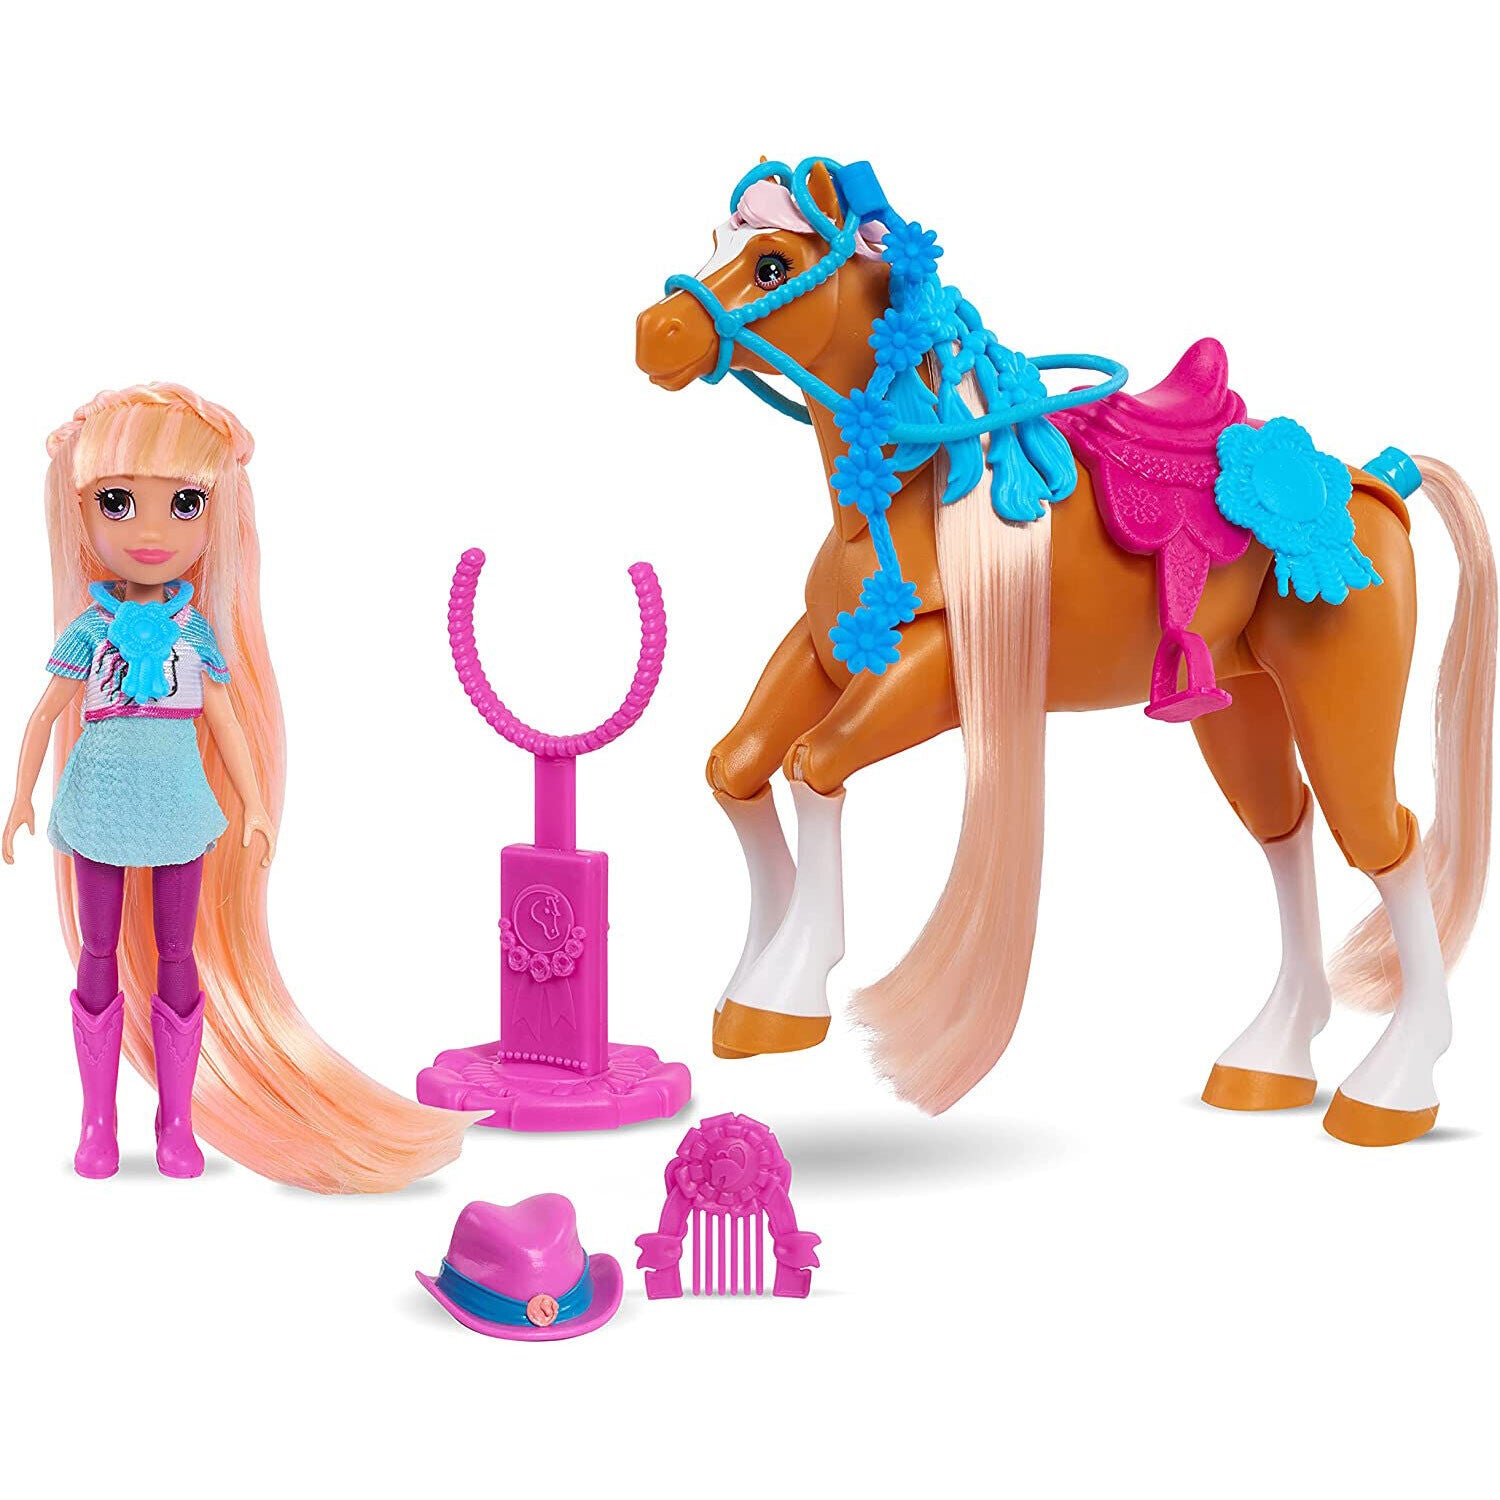 New Winner’s Stable Doll & Horse Set - Oakley & Rose Gold - 11 Pieces